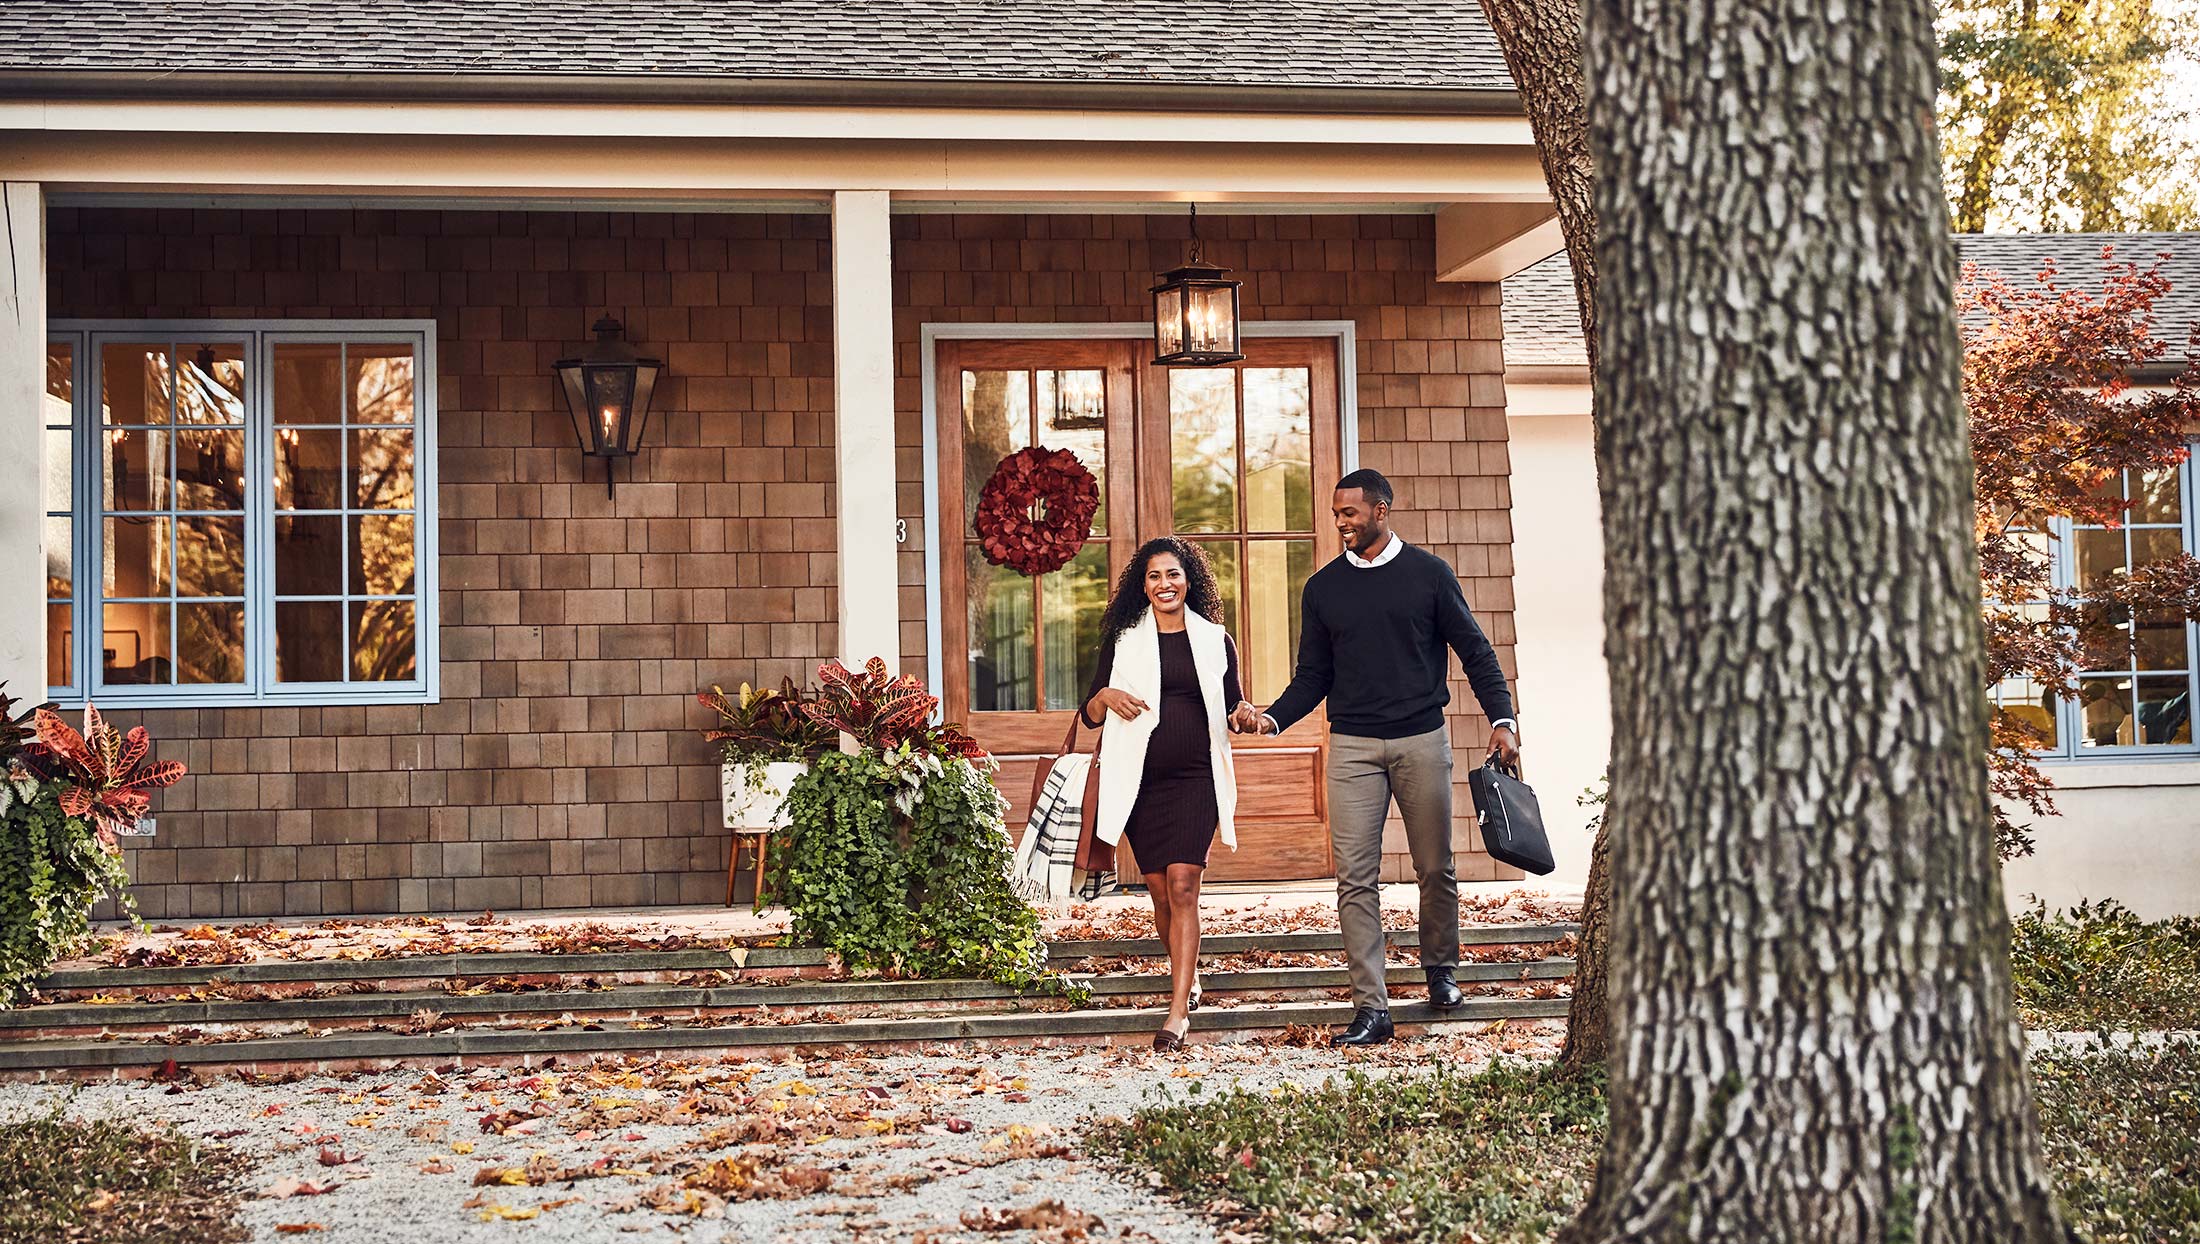 CHASE-BANK-Front-Door-Couple-Autumn-2161-2